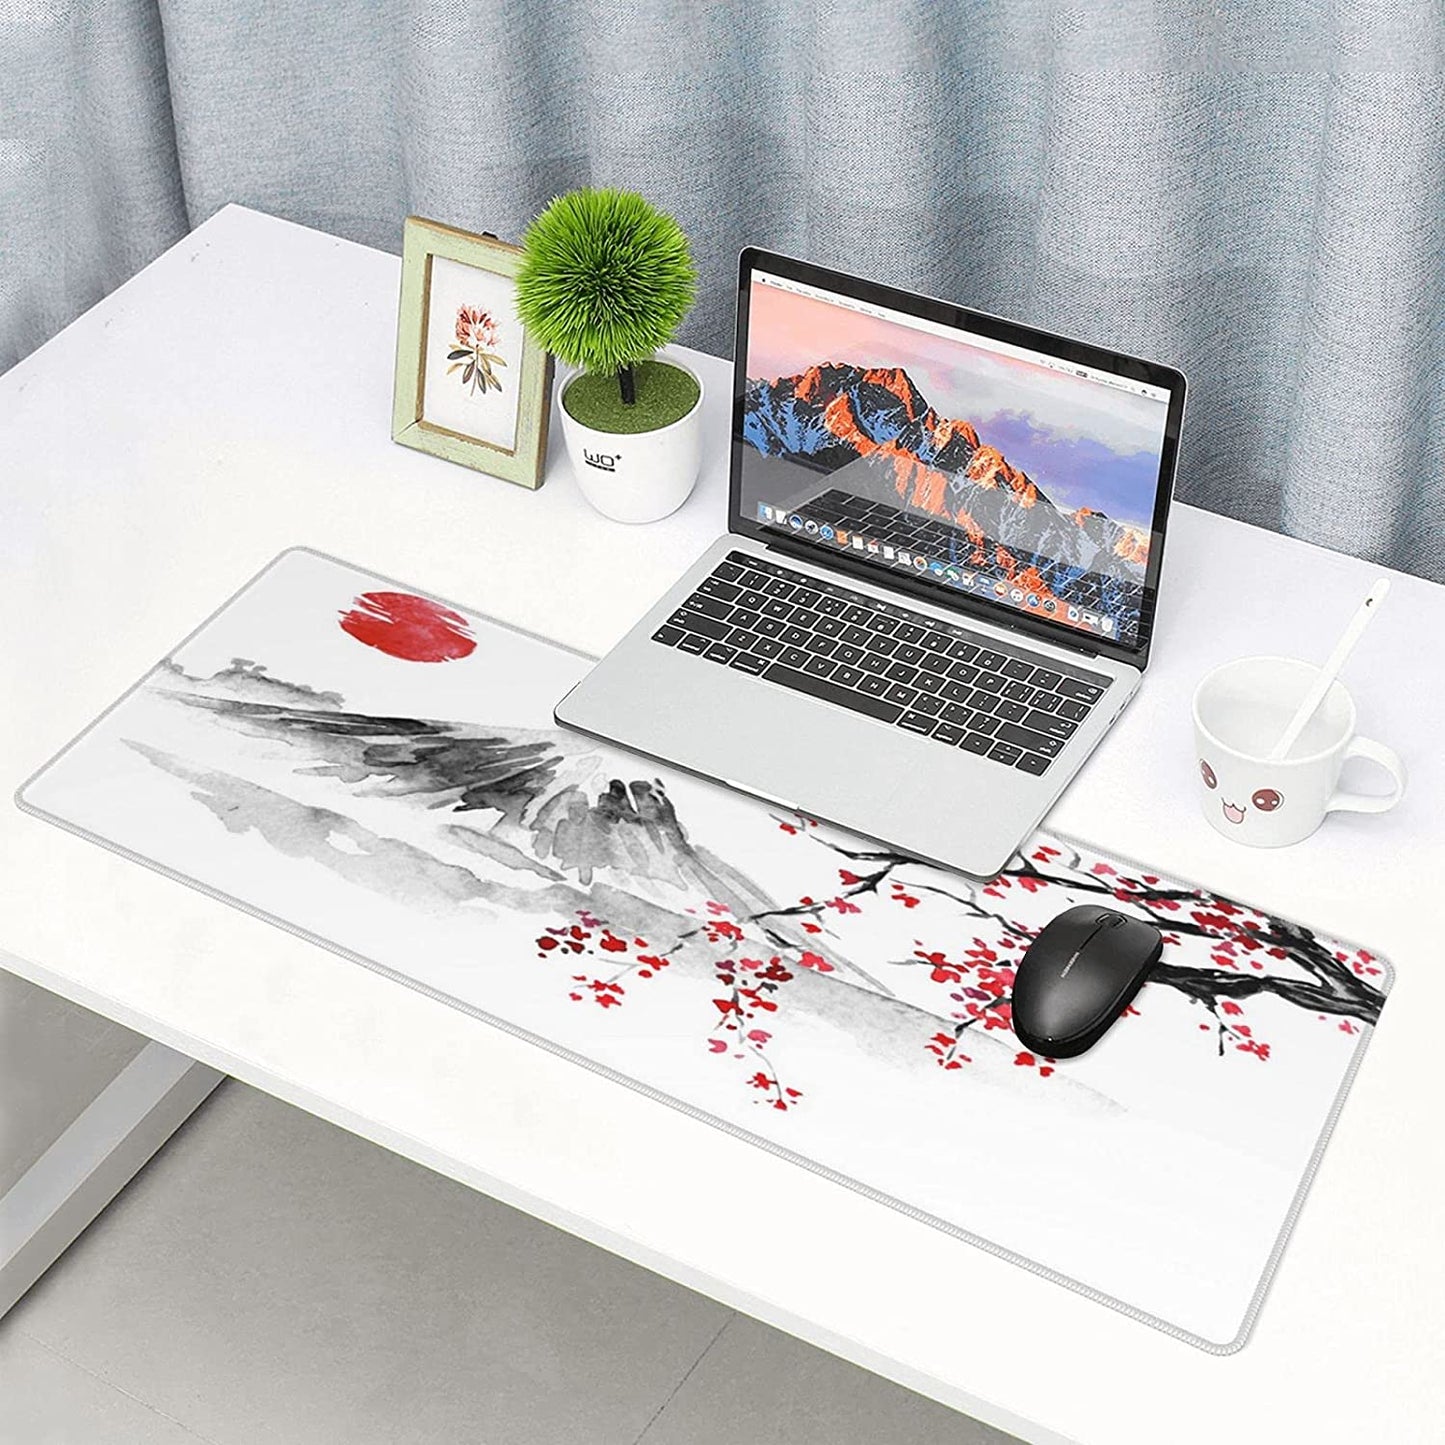 Japanese Cherry Blossom Sakura Large Gaming Mouse Pad 31.5×11.8 Inch XL Extended Waterproof Moudepads Non-Slip Rubber Base Keyboard Mat for Work/Office/Home